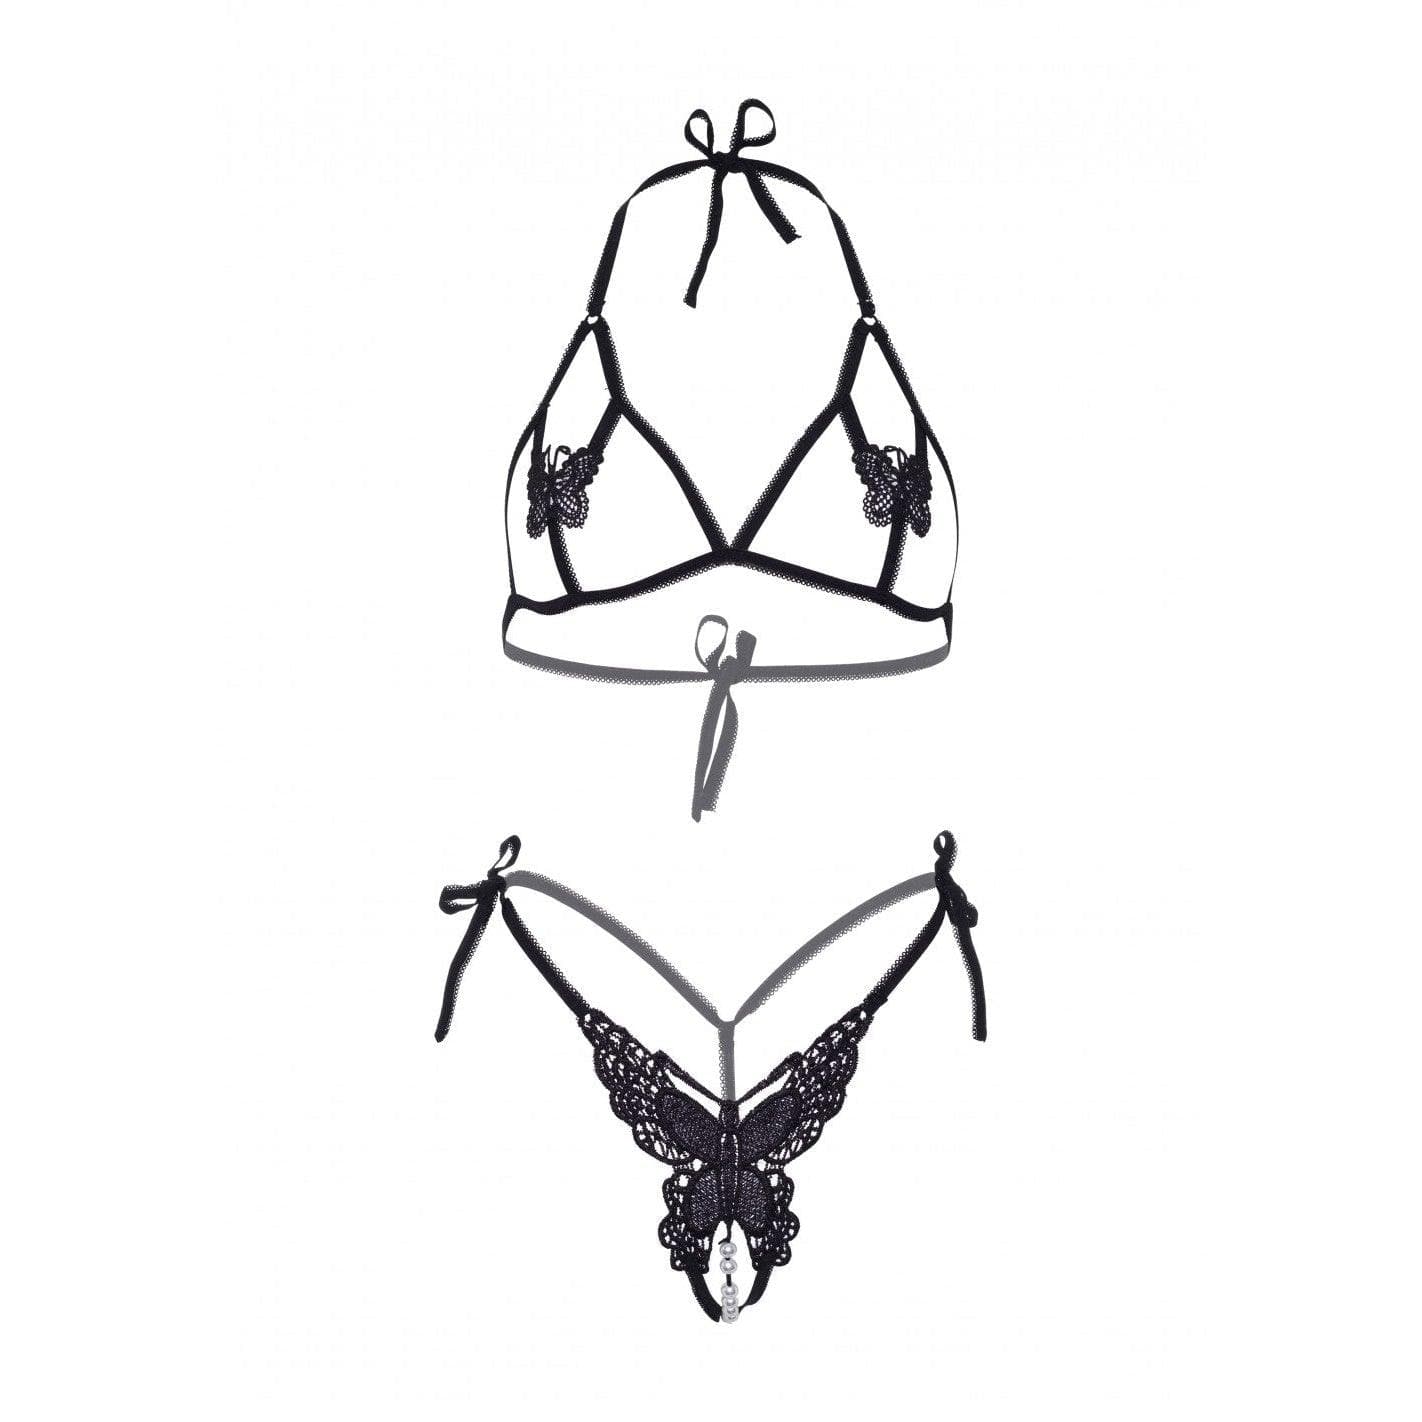 Leg Avenue Kink 4-Piece Open Cup Bra and G-String Set